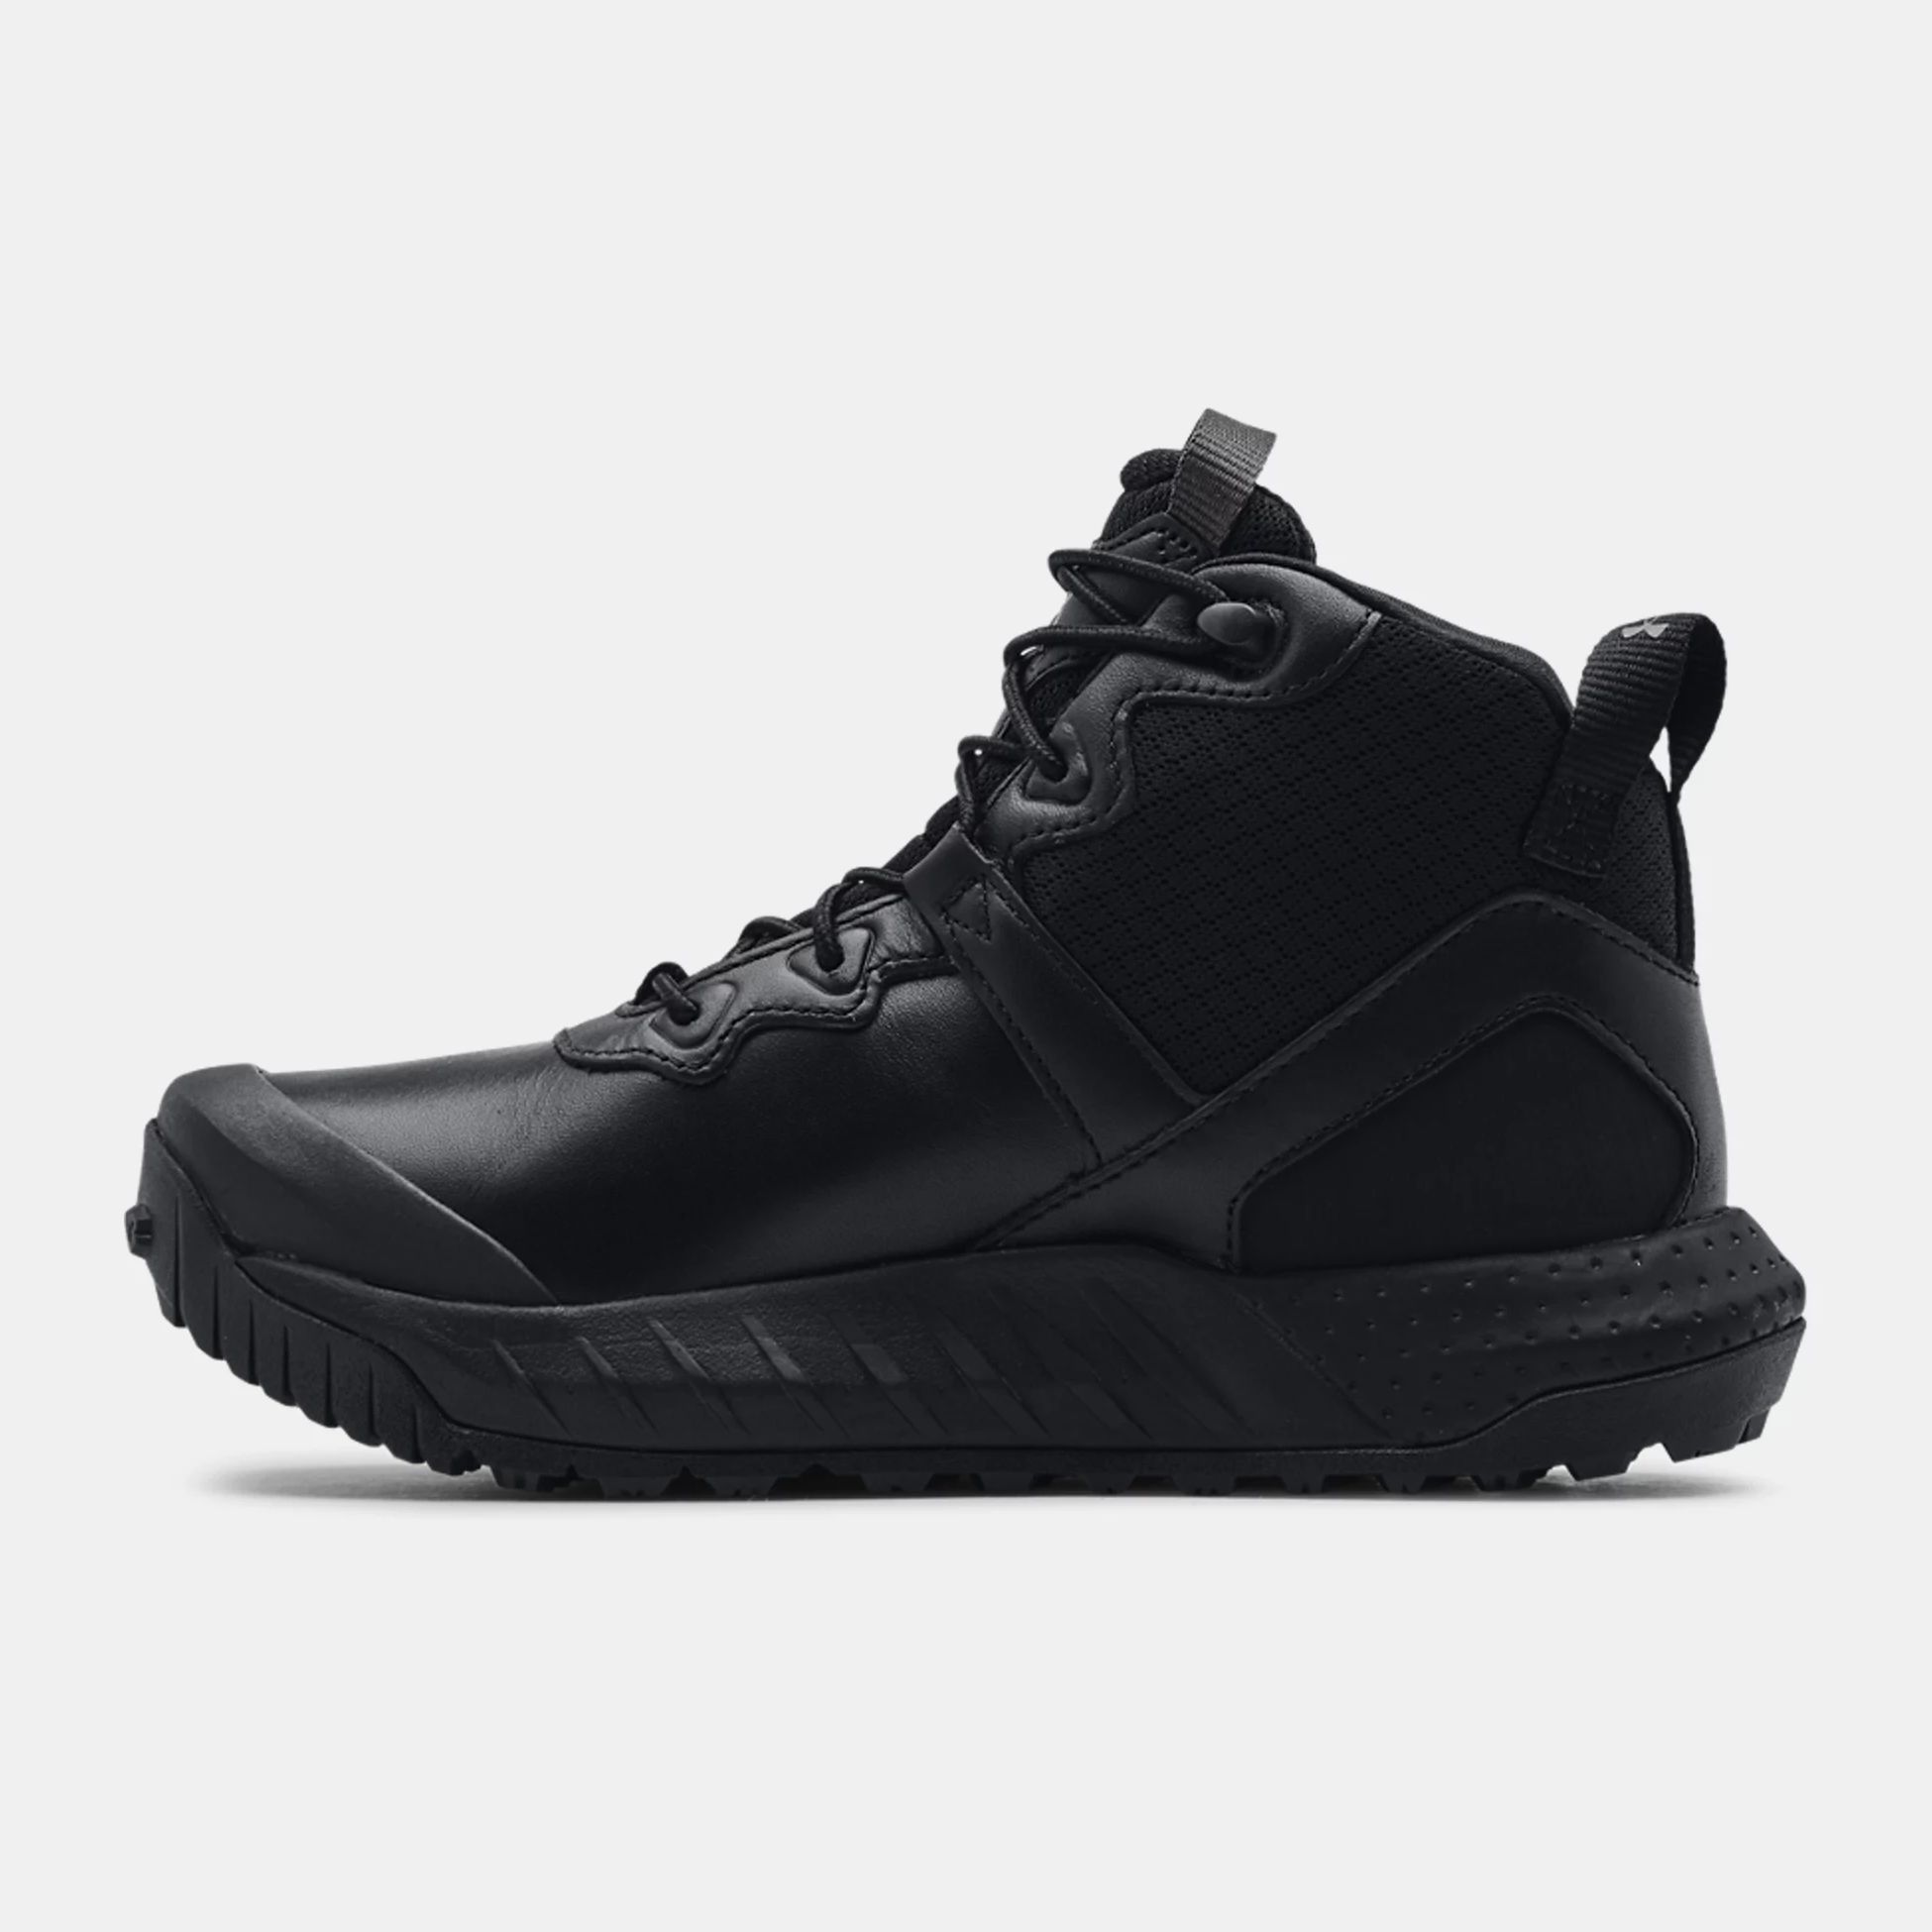 Outdoor Shoes -  under armour UA Micro G Valsetz Mid Leather Waterproof Tactical Boots